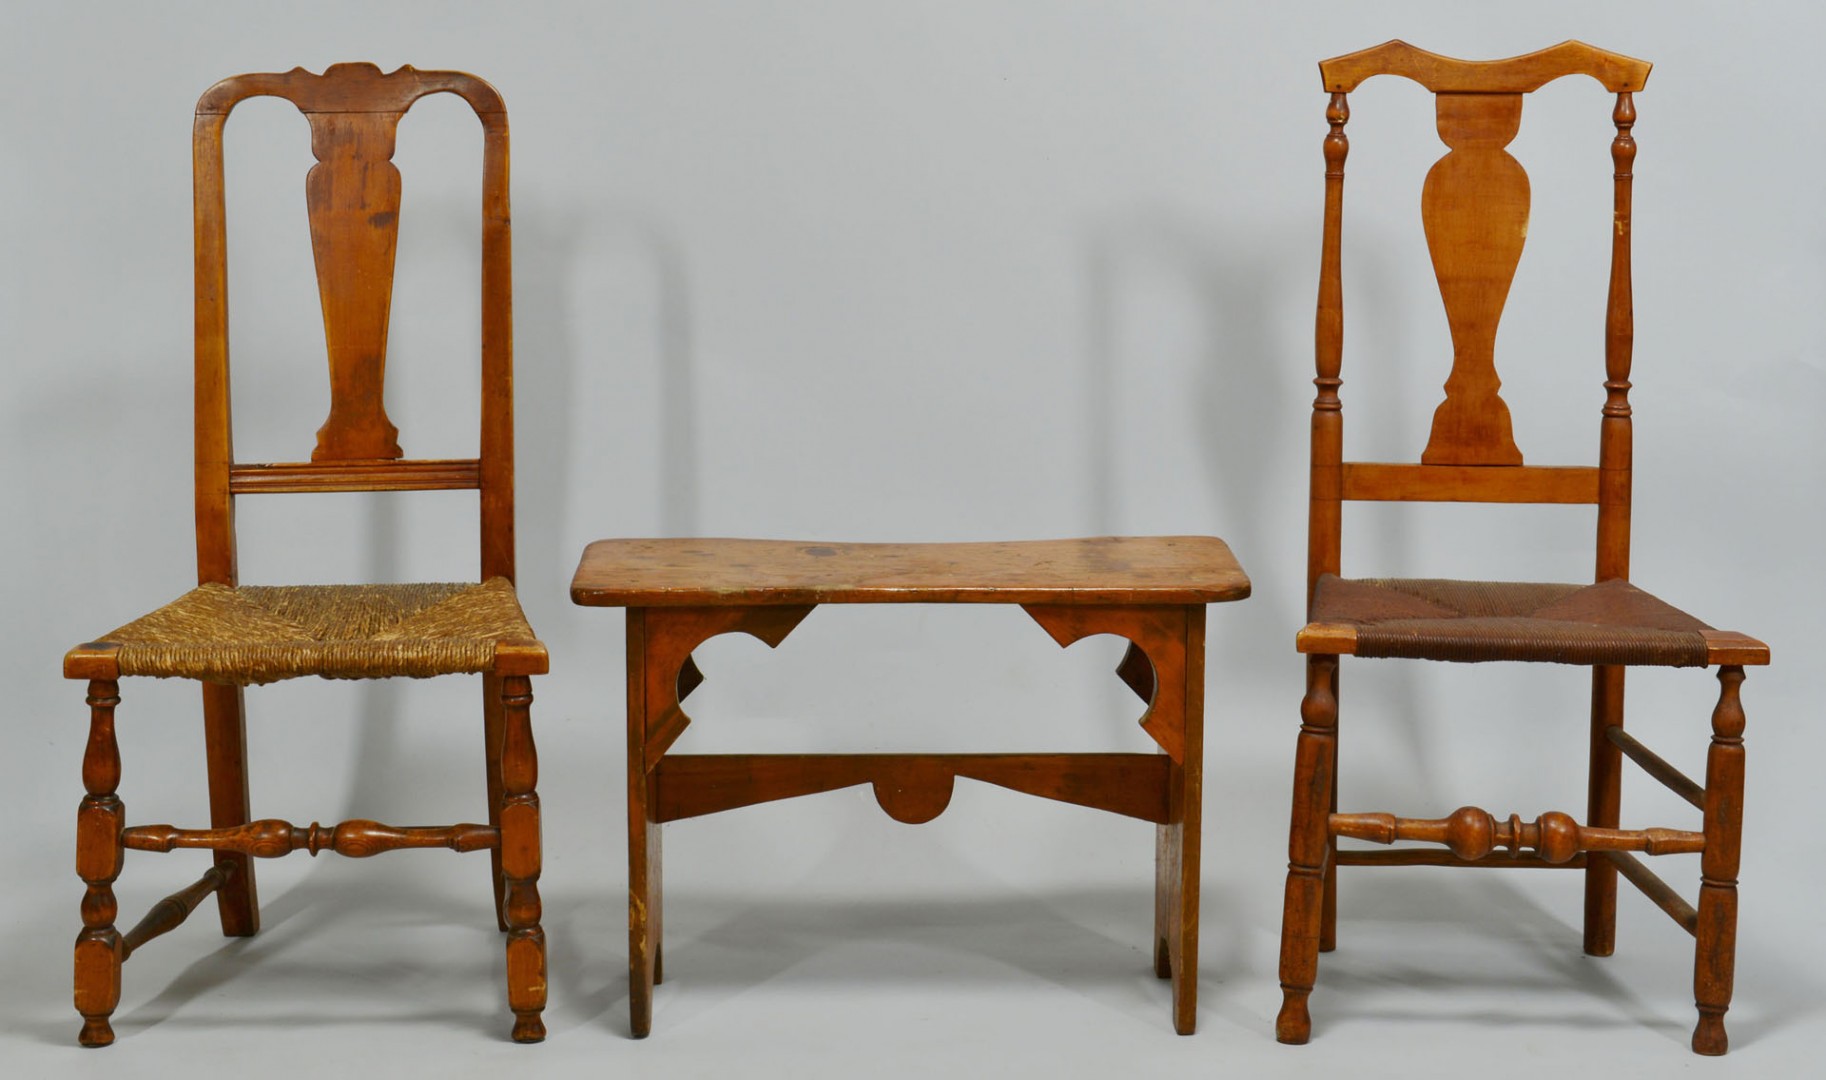 Lot 341: 2 Queen Anne Chairs and Trestle Bench